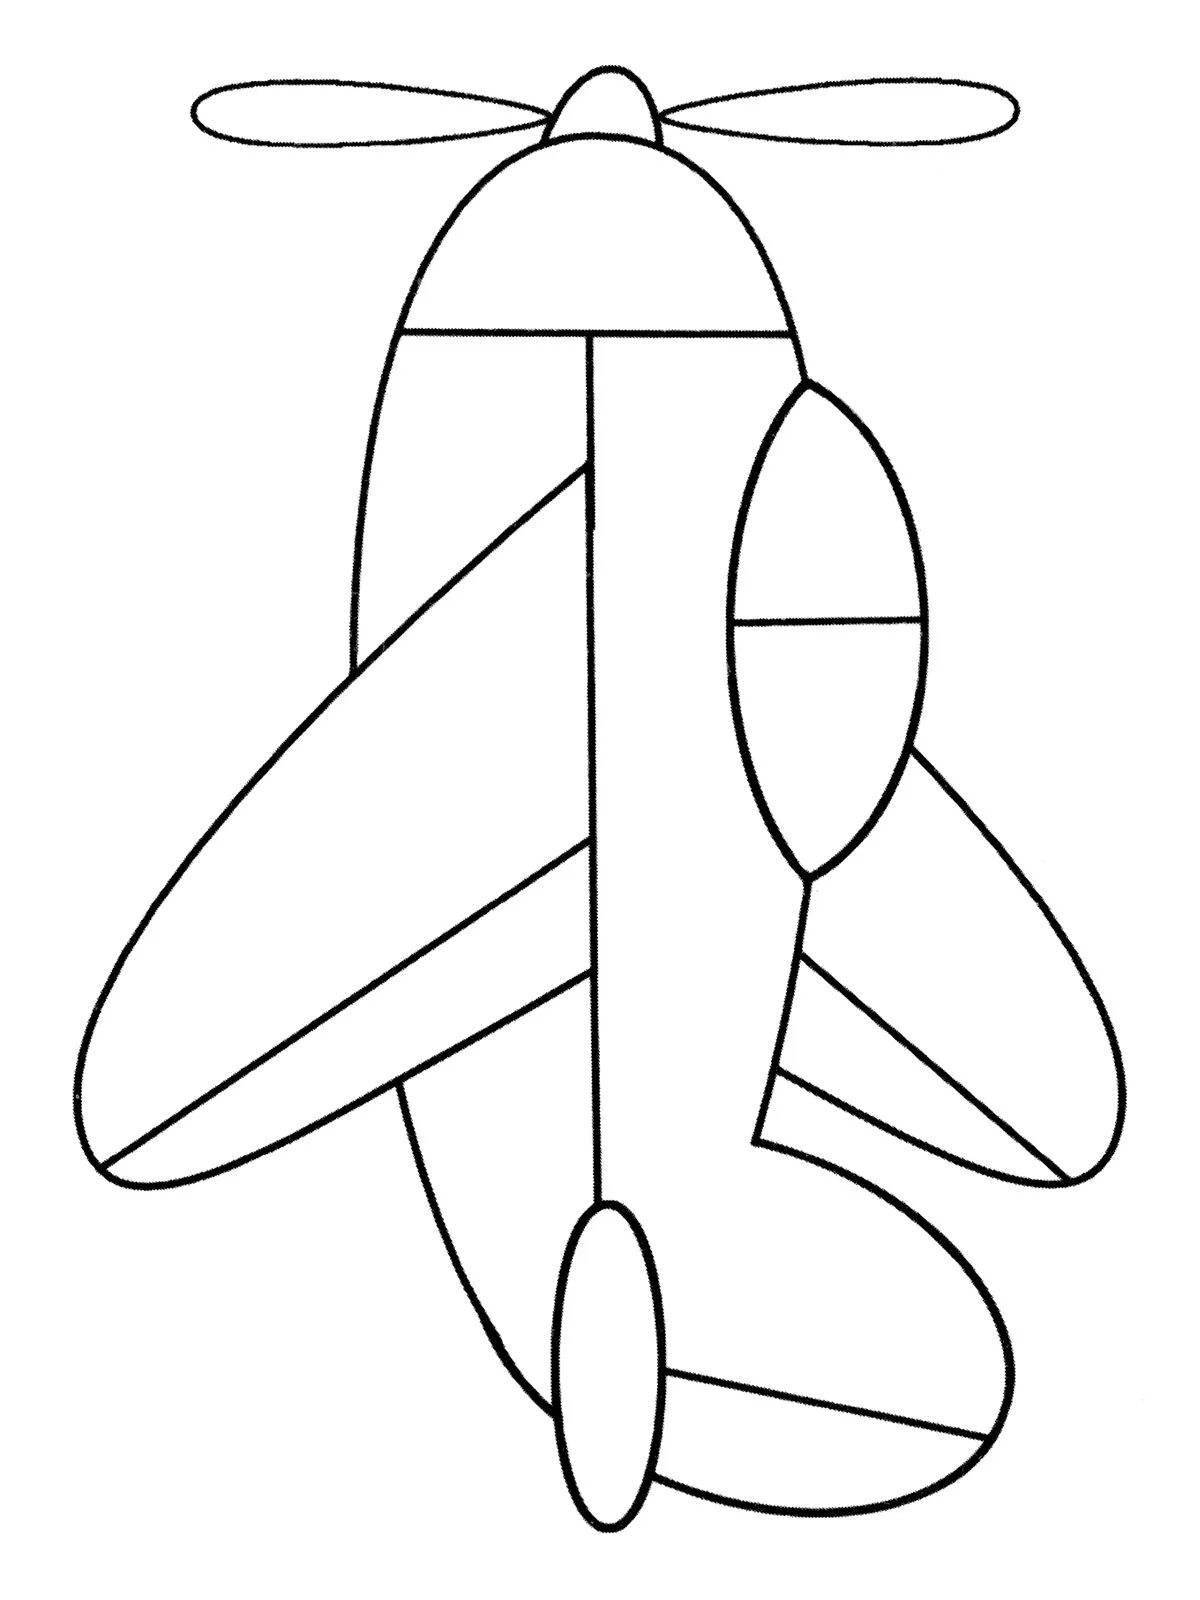 Creative coloring pages with airplanes for children 2-3 years old